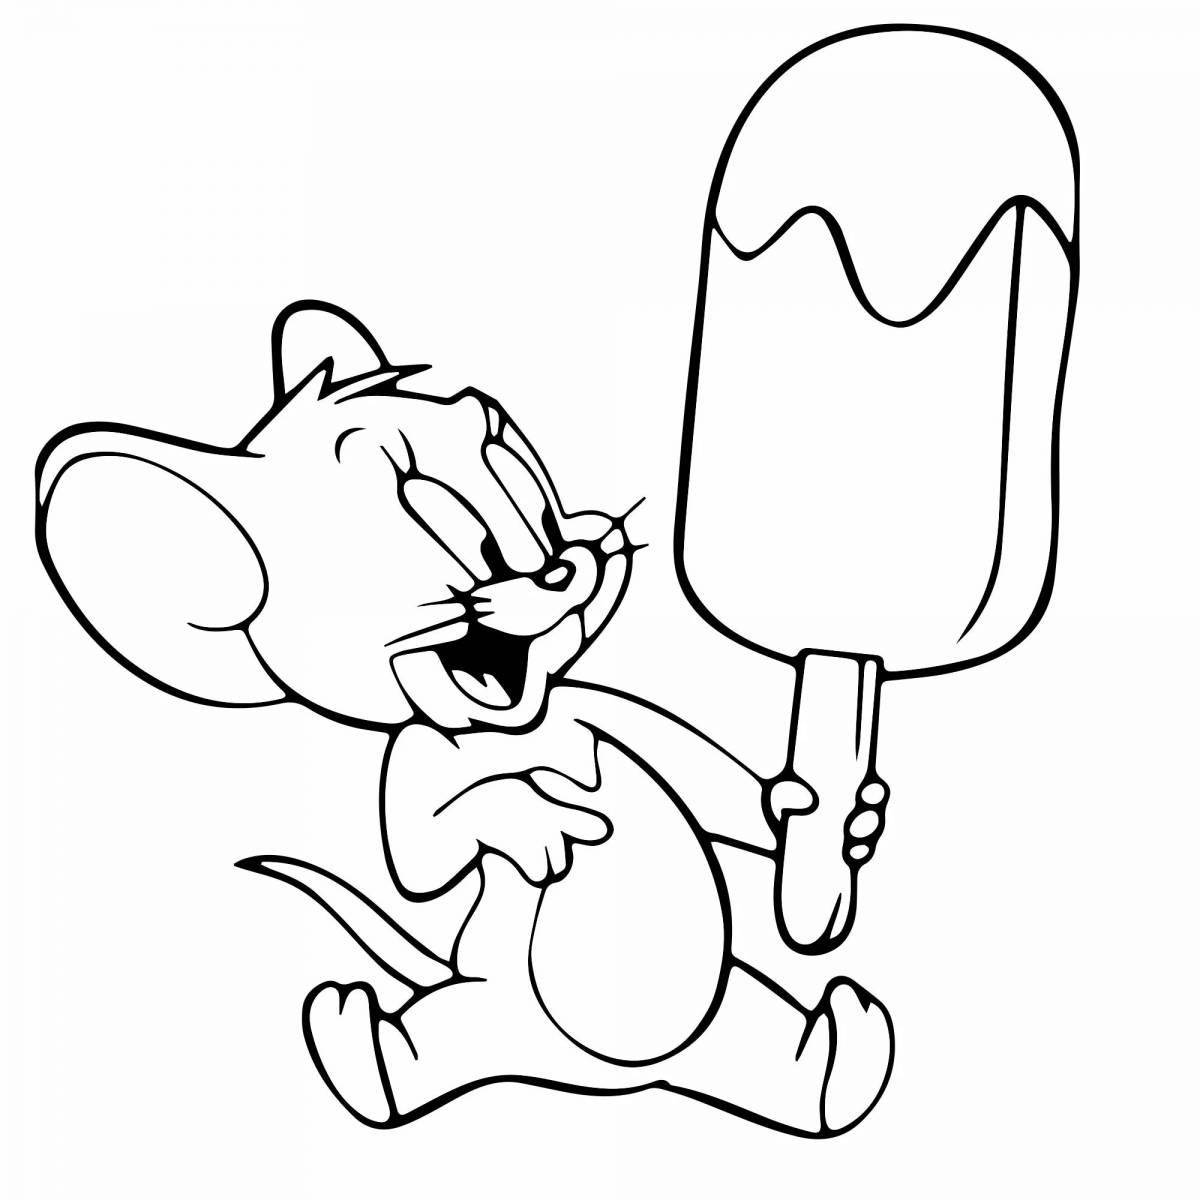 Tom and jerry funny coloring pages